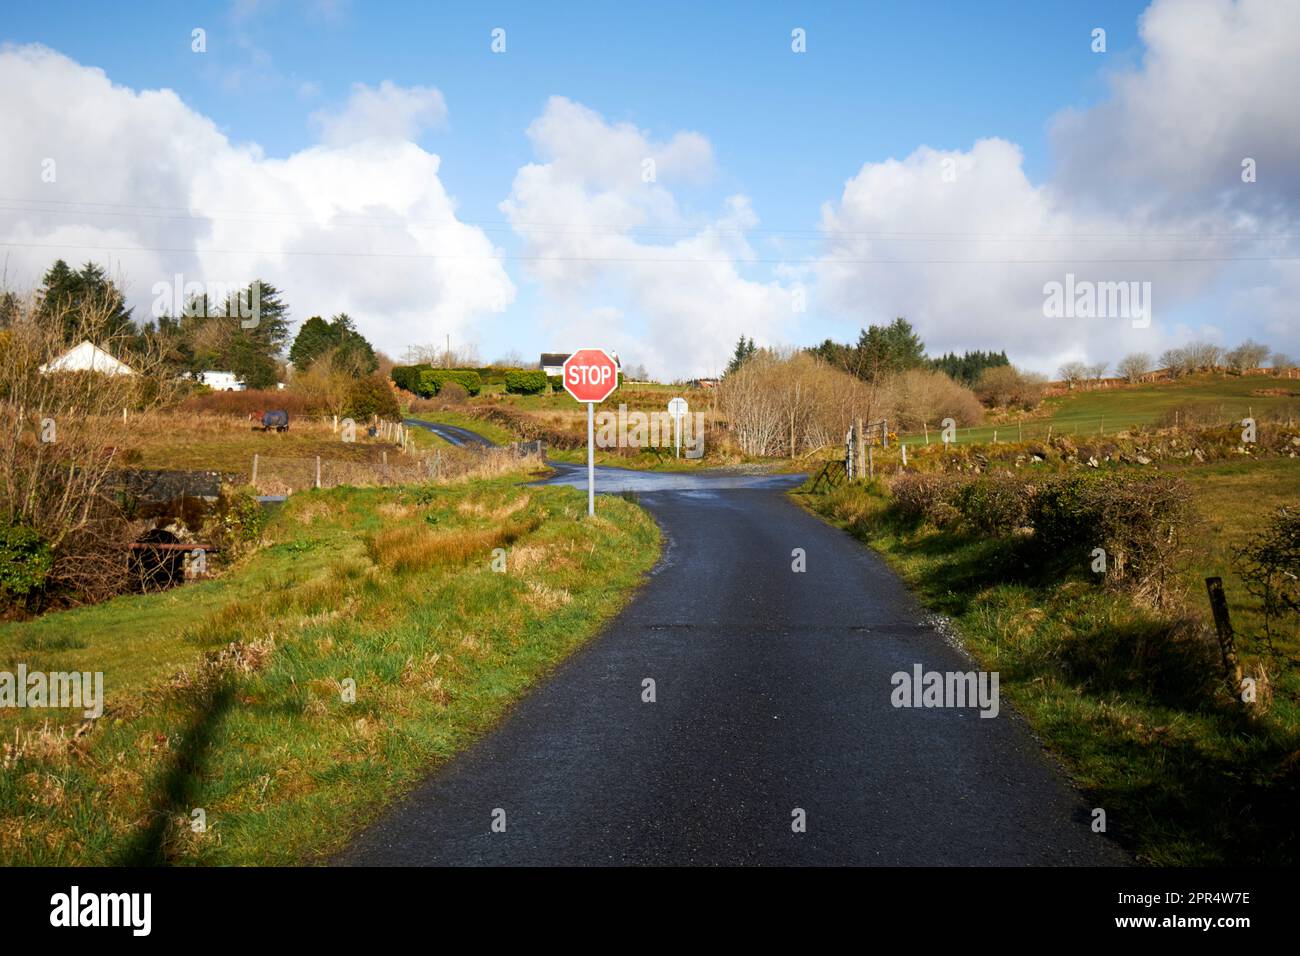 long single track road approaching stop sign junction county donegal republic of ireland Stock Photo